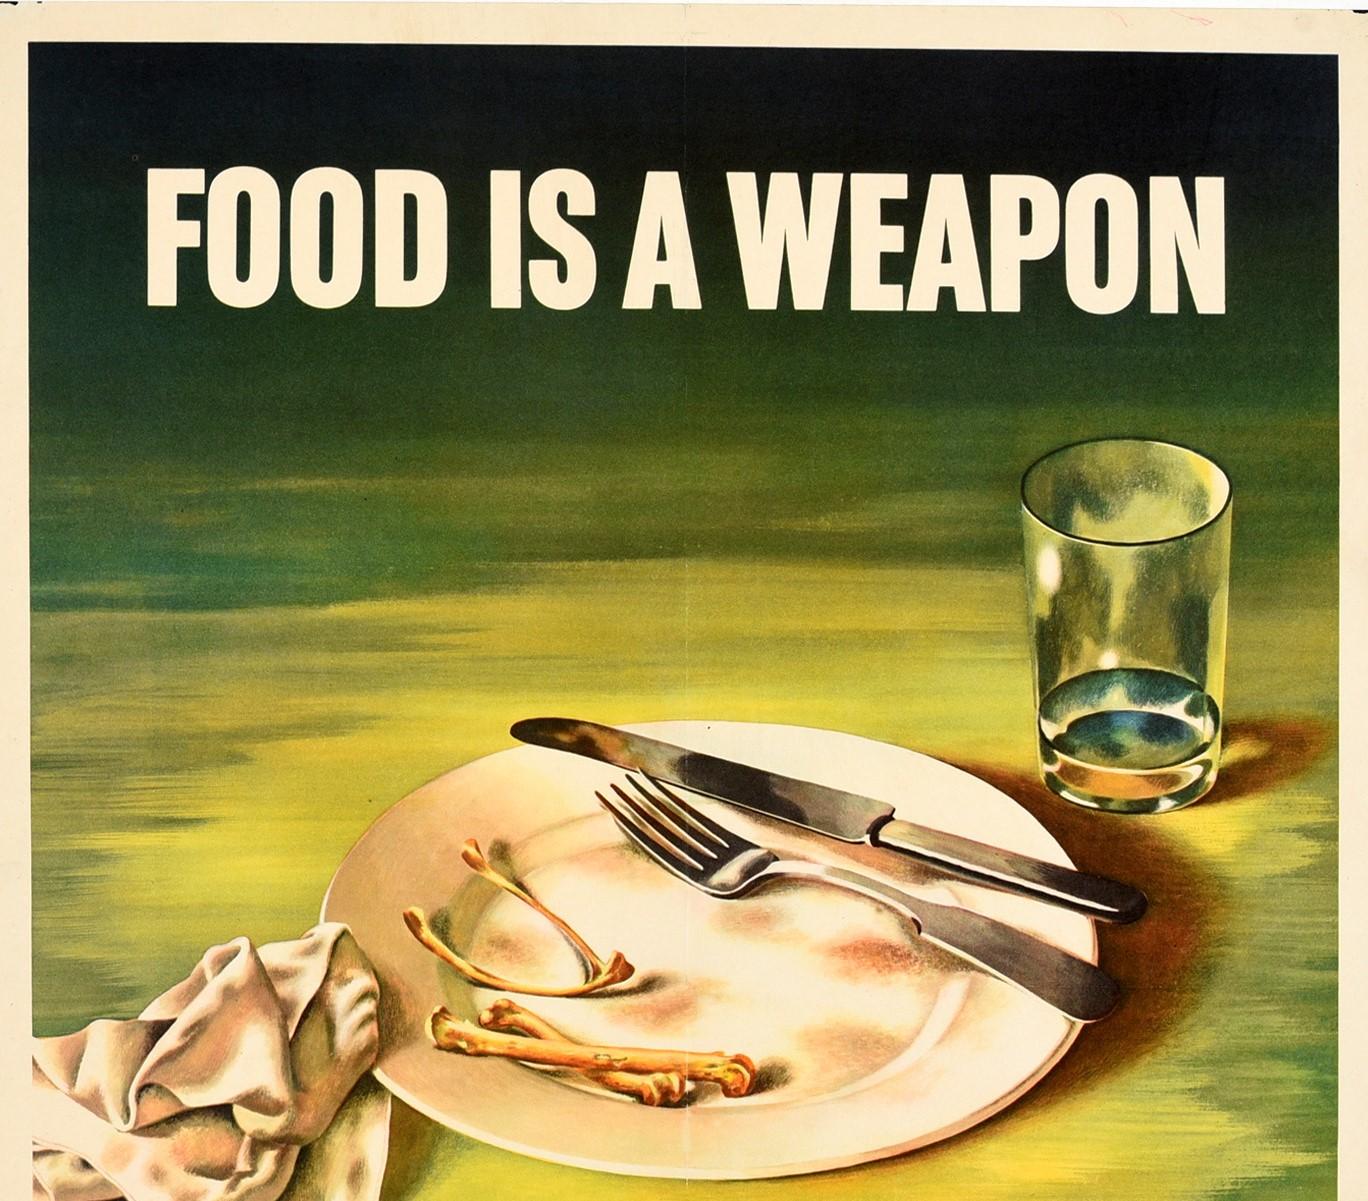 Original Vintage Poster Food Is A Weapon Don't Waste It WWII Wartime Nutrition - Print by Unknown